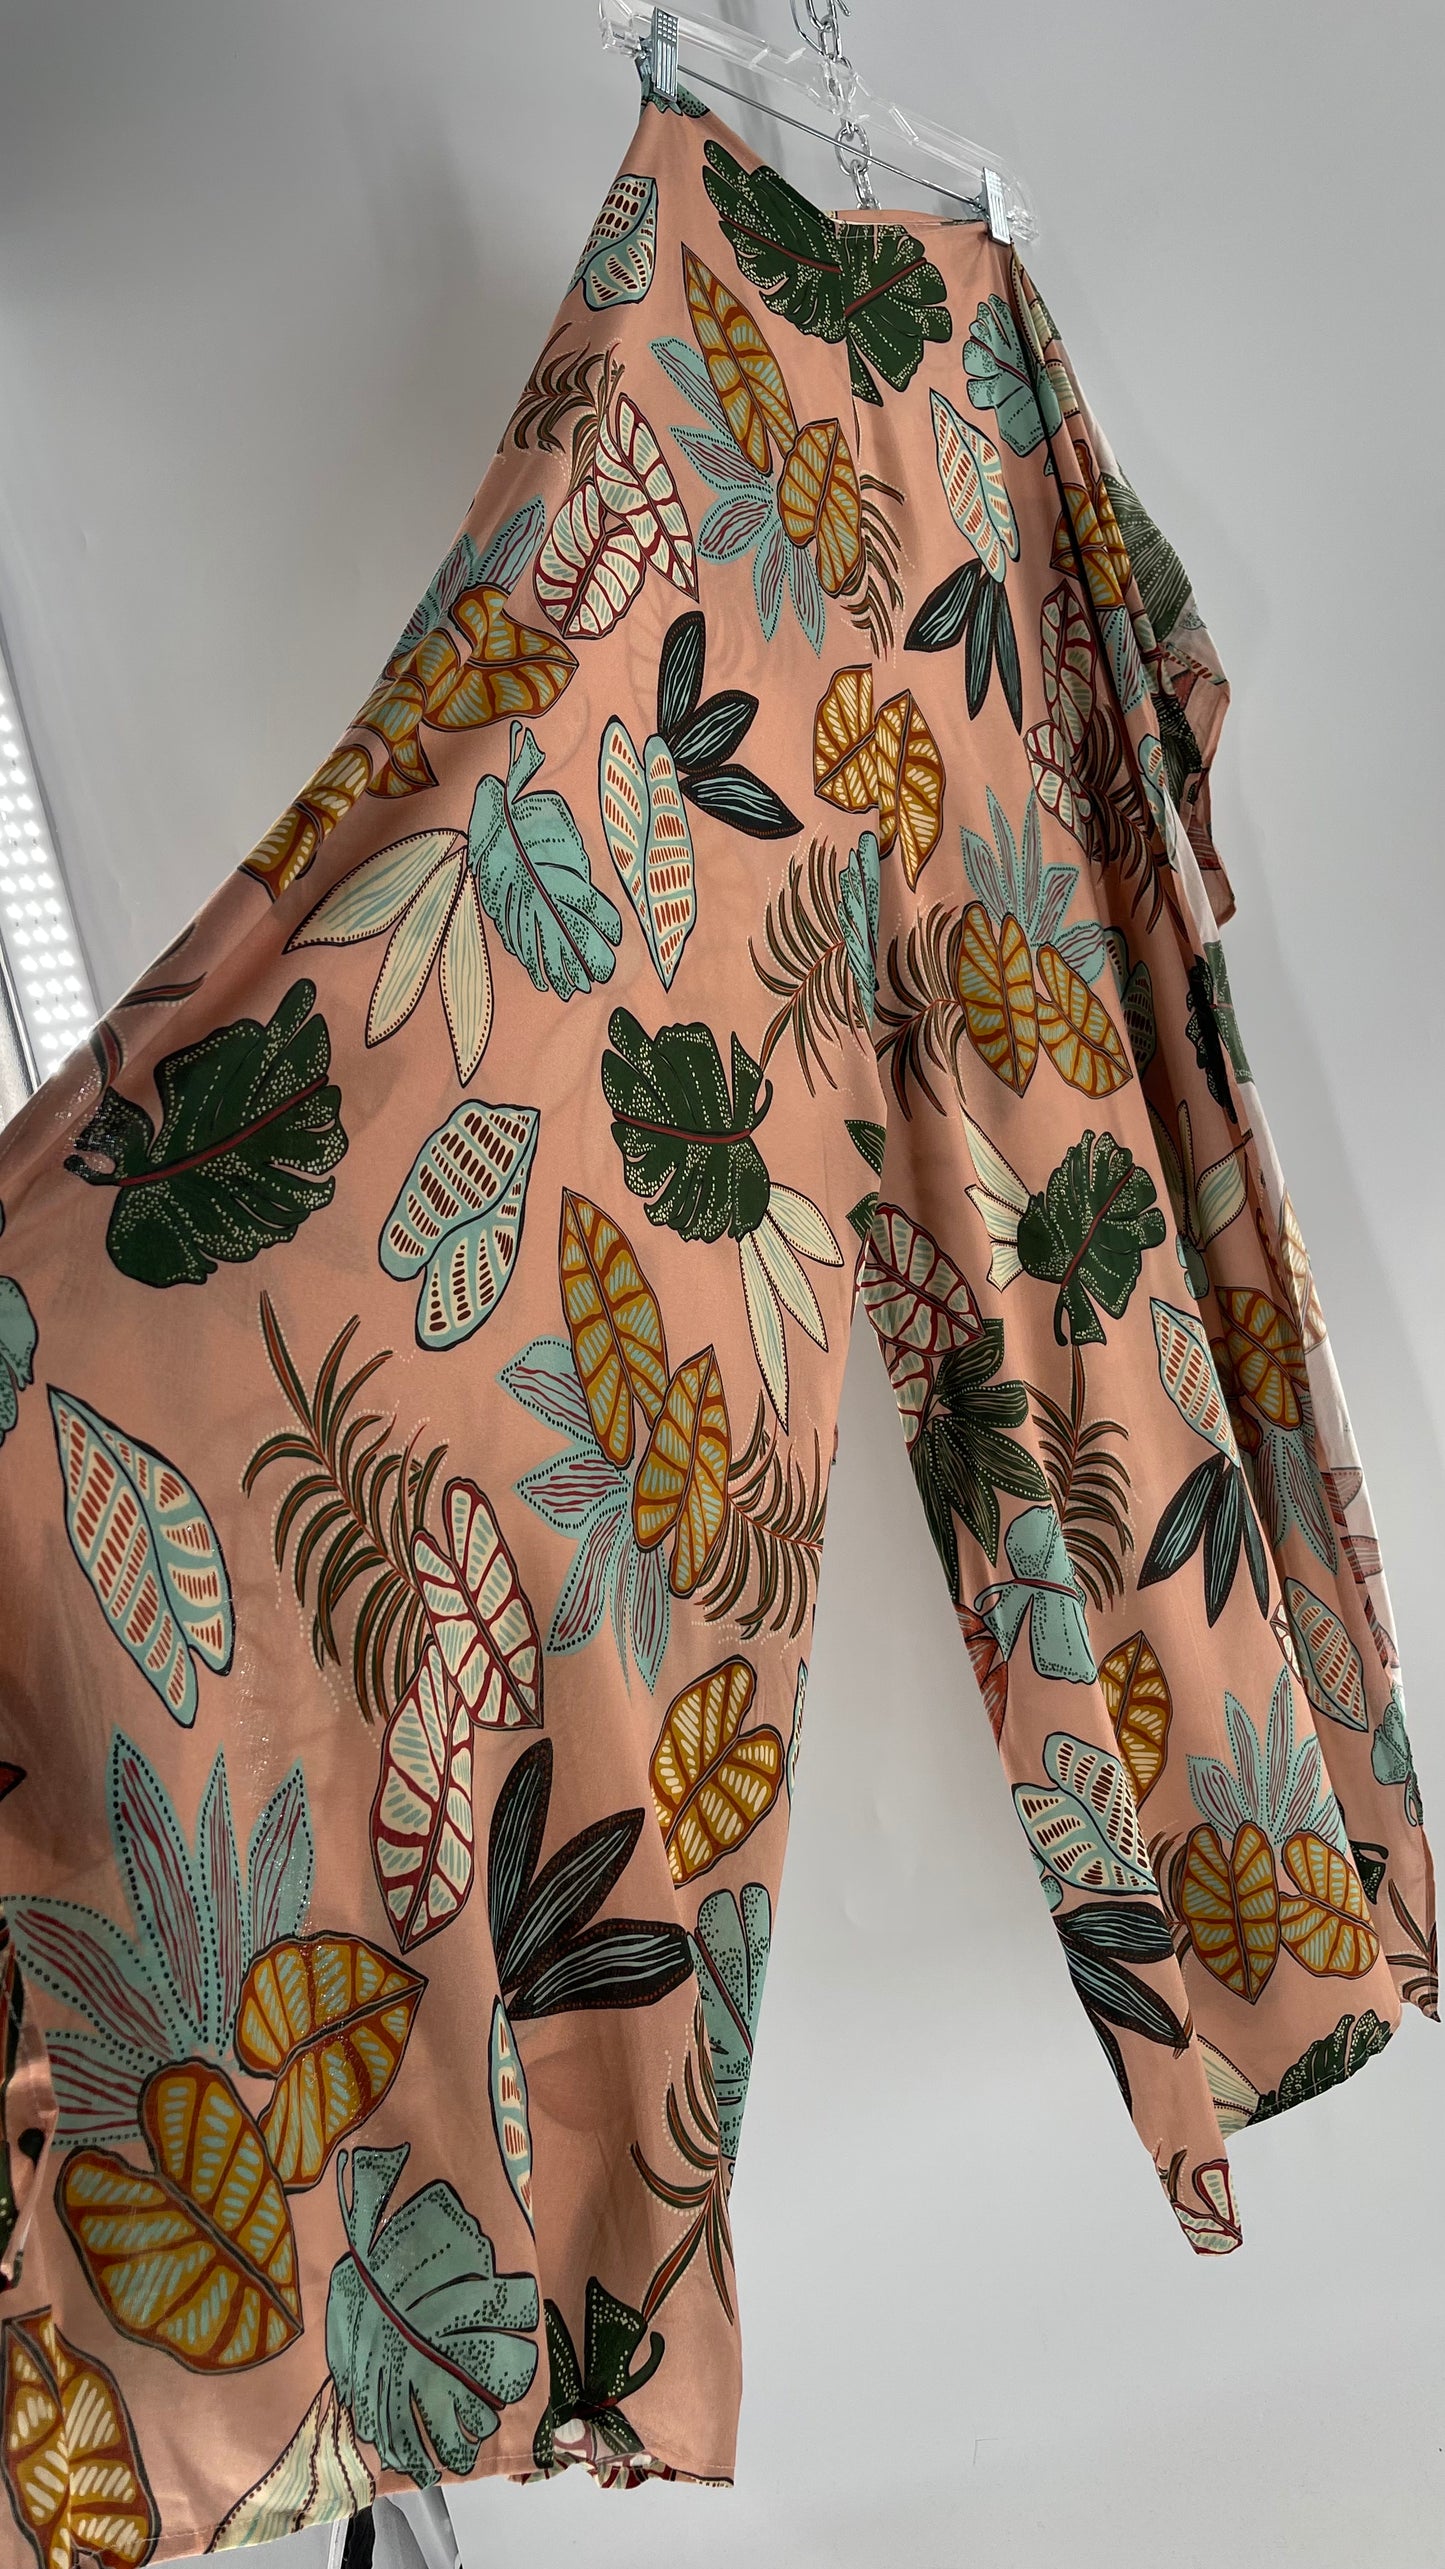 Handmade 9 in 1 Pink Jumpsuit Covered in Tropical Doodle Leaf Design (One Size) •AS SEEN ON TIKTOK•